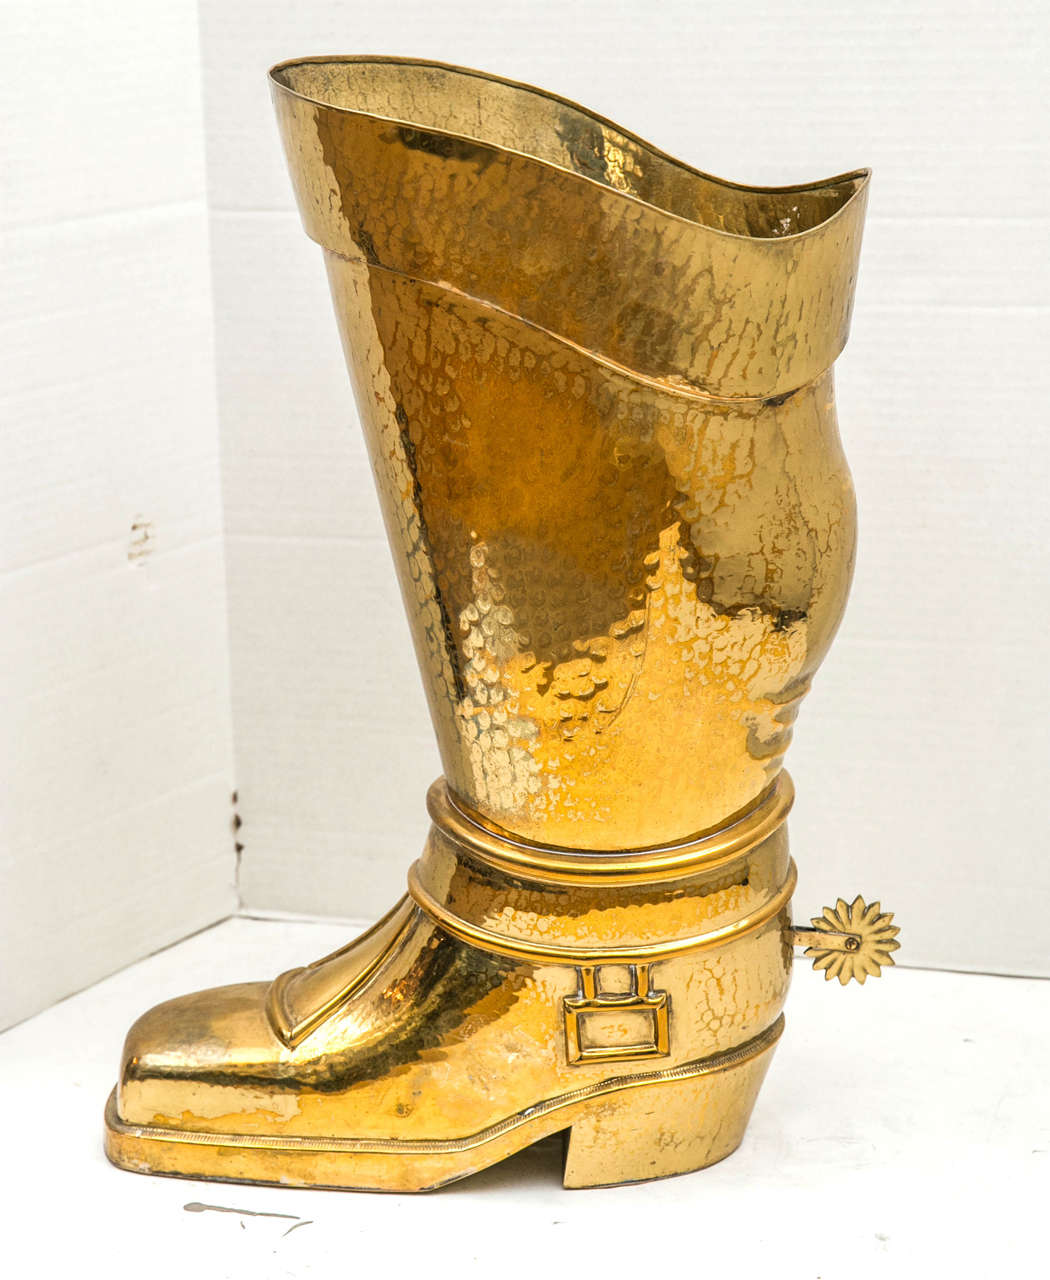 Hammered Brass Riding Boot Umbrella Stand In Excellent Condition For Sale In Mt Kisco, NY